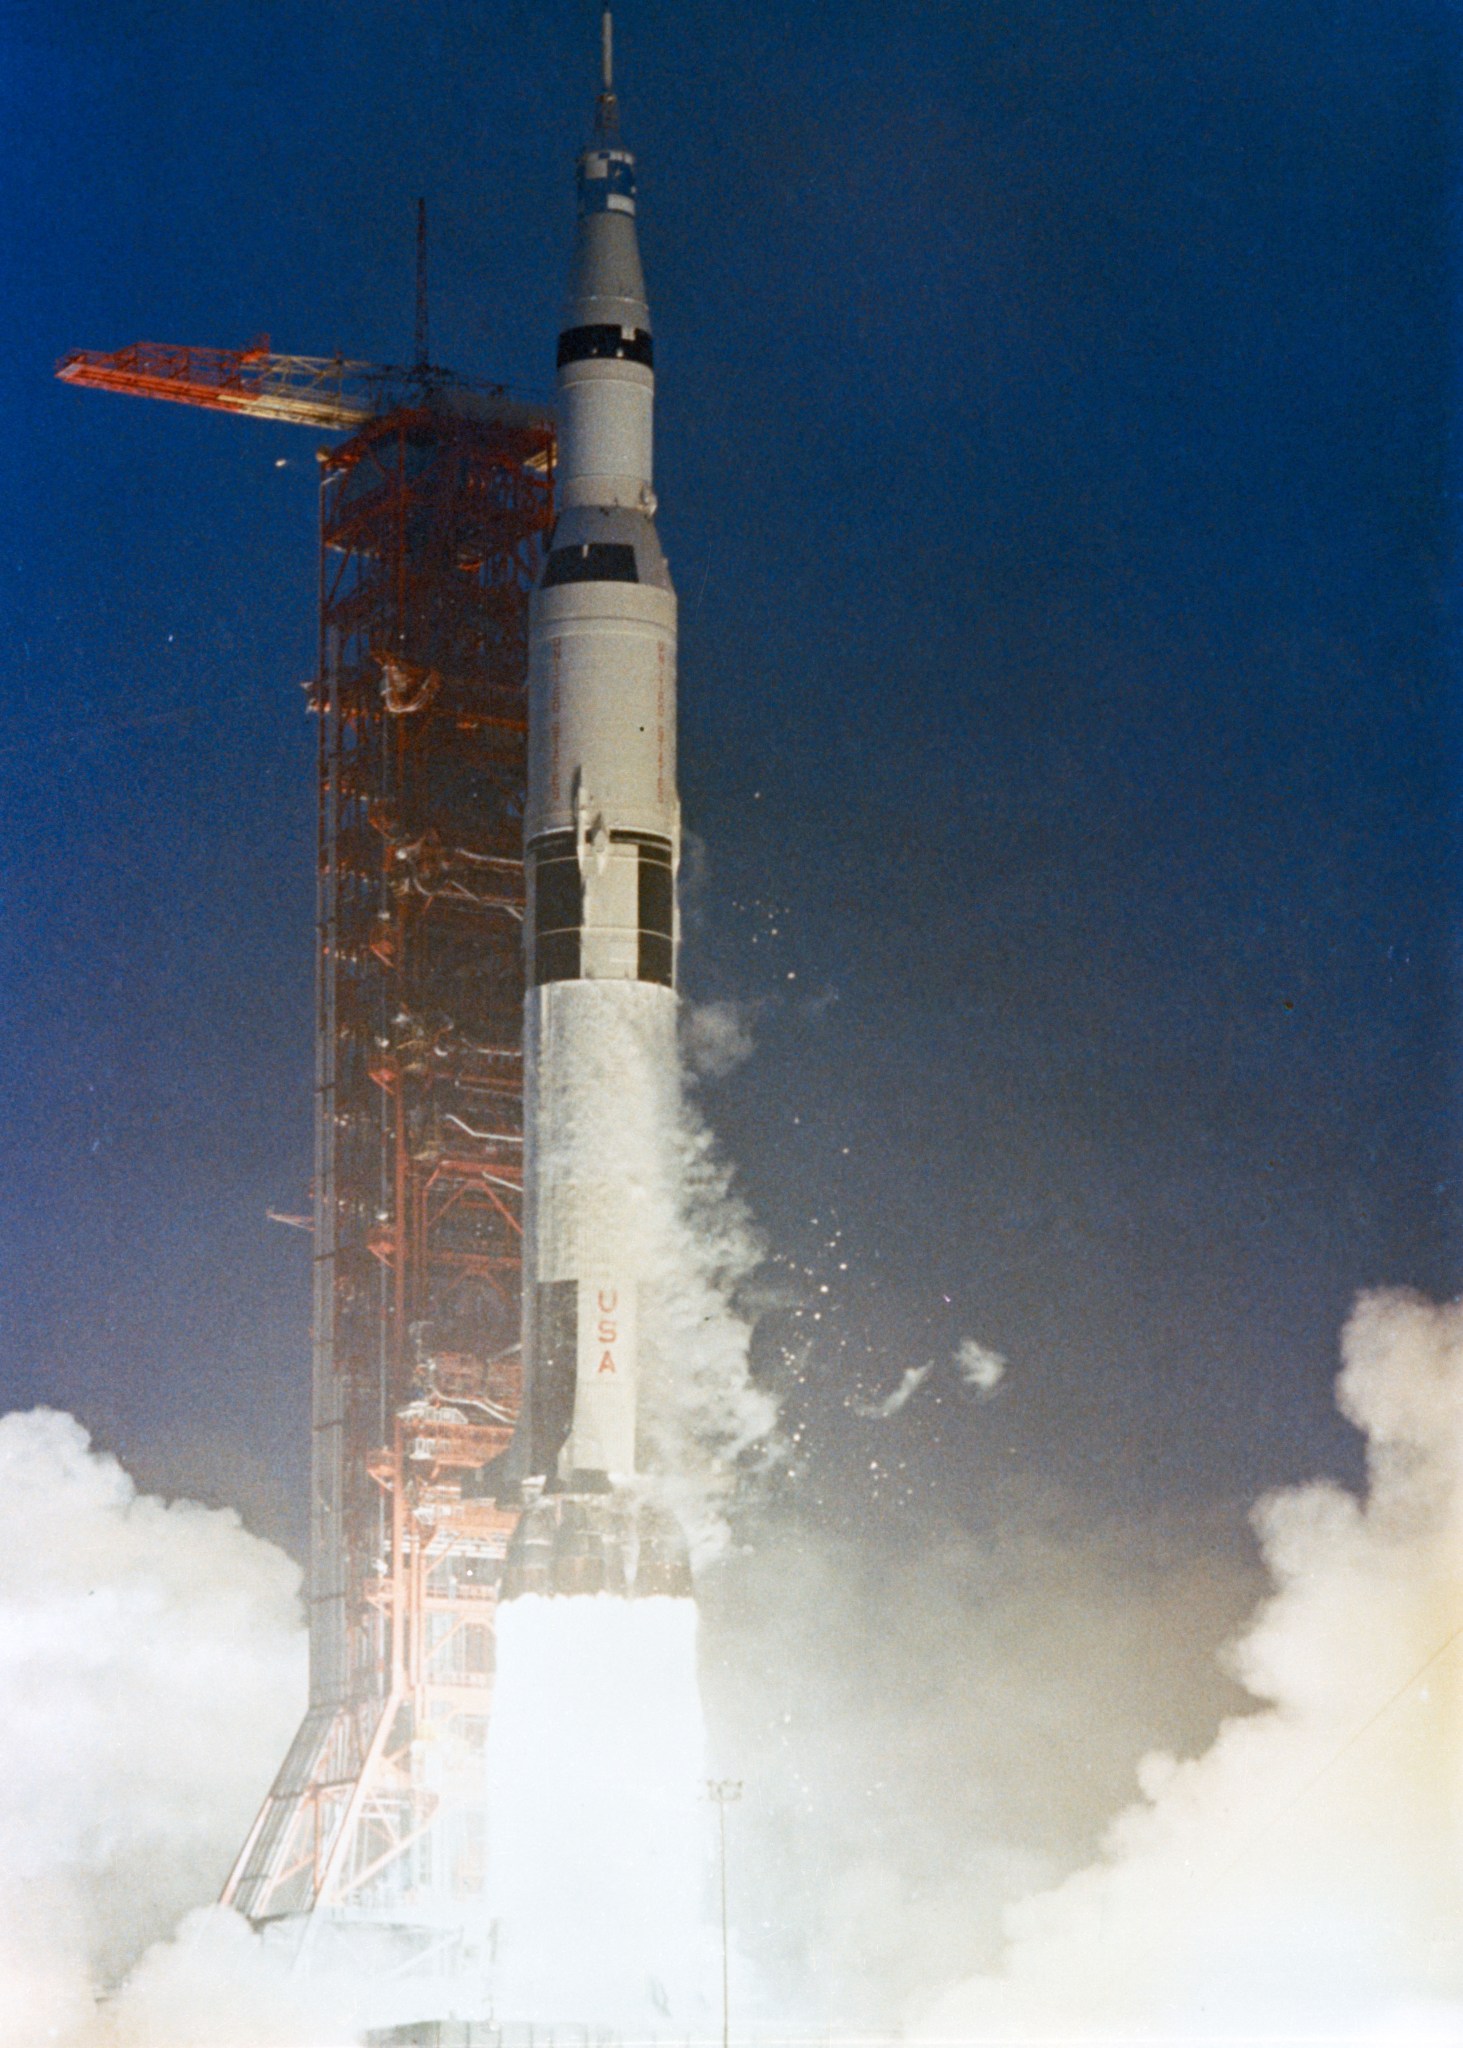 The Saturn V rocket with the Apollo 12 space vehicle lifts off from Launch Pad 39A at 11:22 a.m. EST on Nov. 14, 1969.